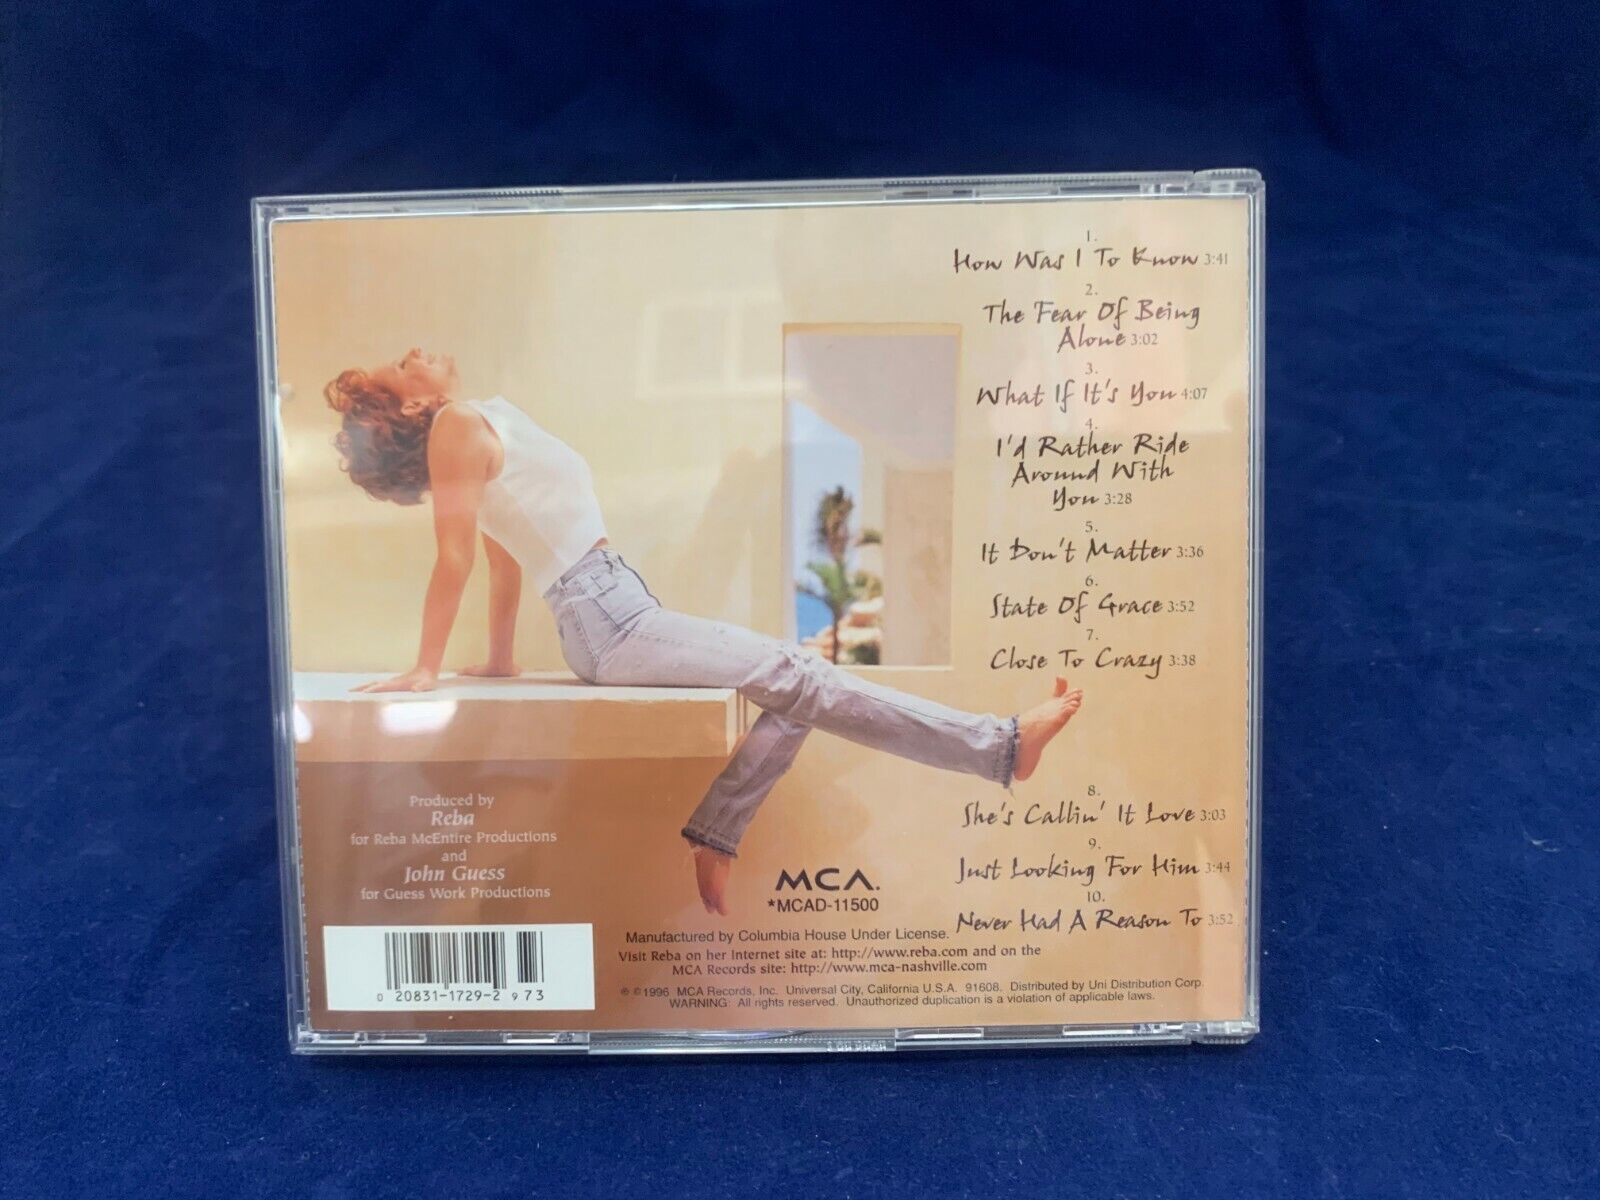 Reba Mcentire What if its you CD Album Used with Free Shipping MCA Records 1996